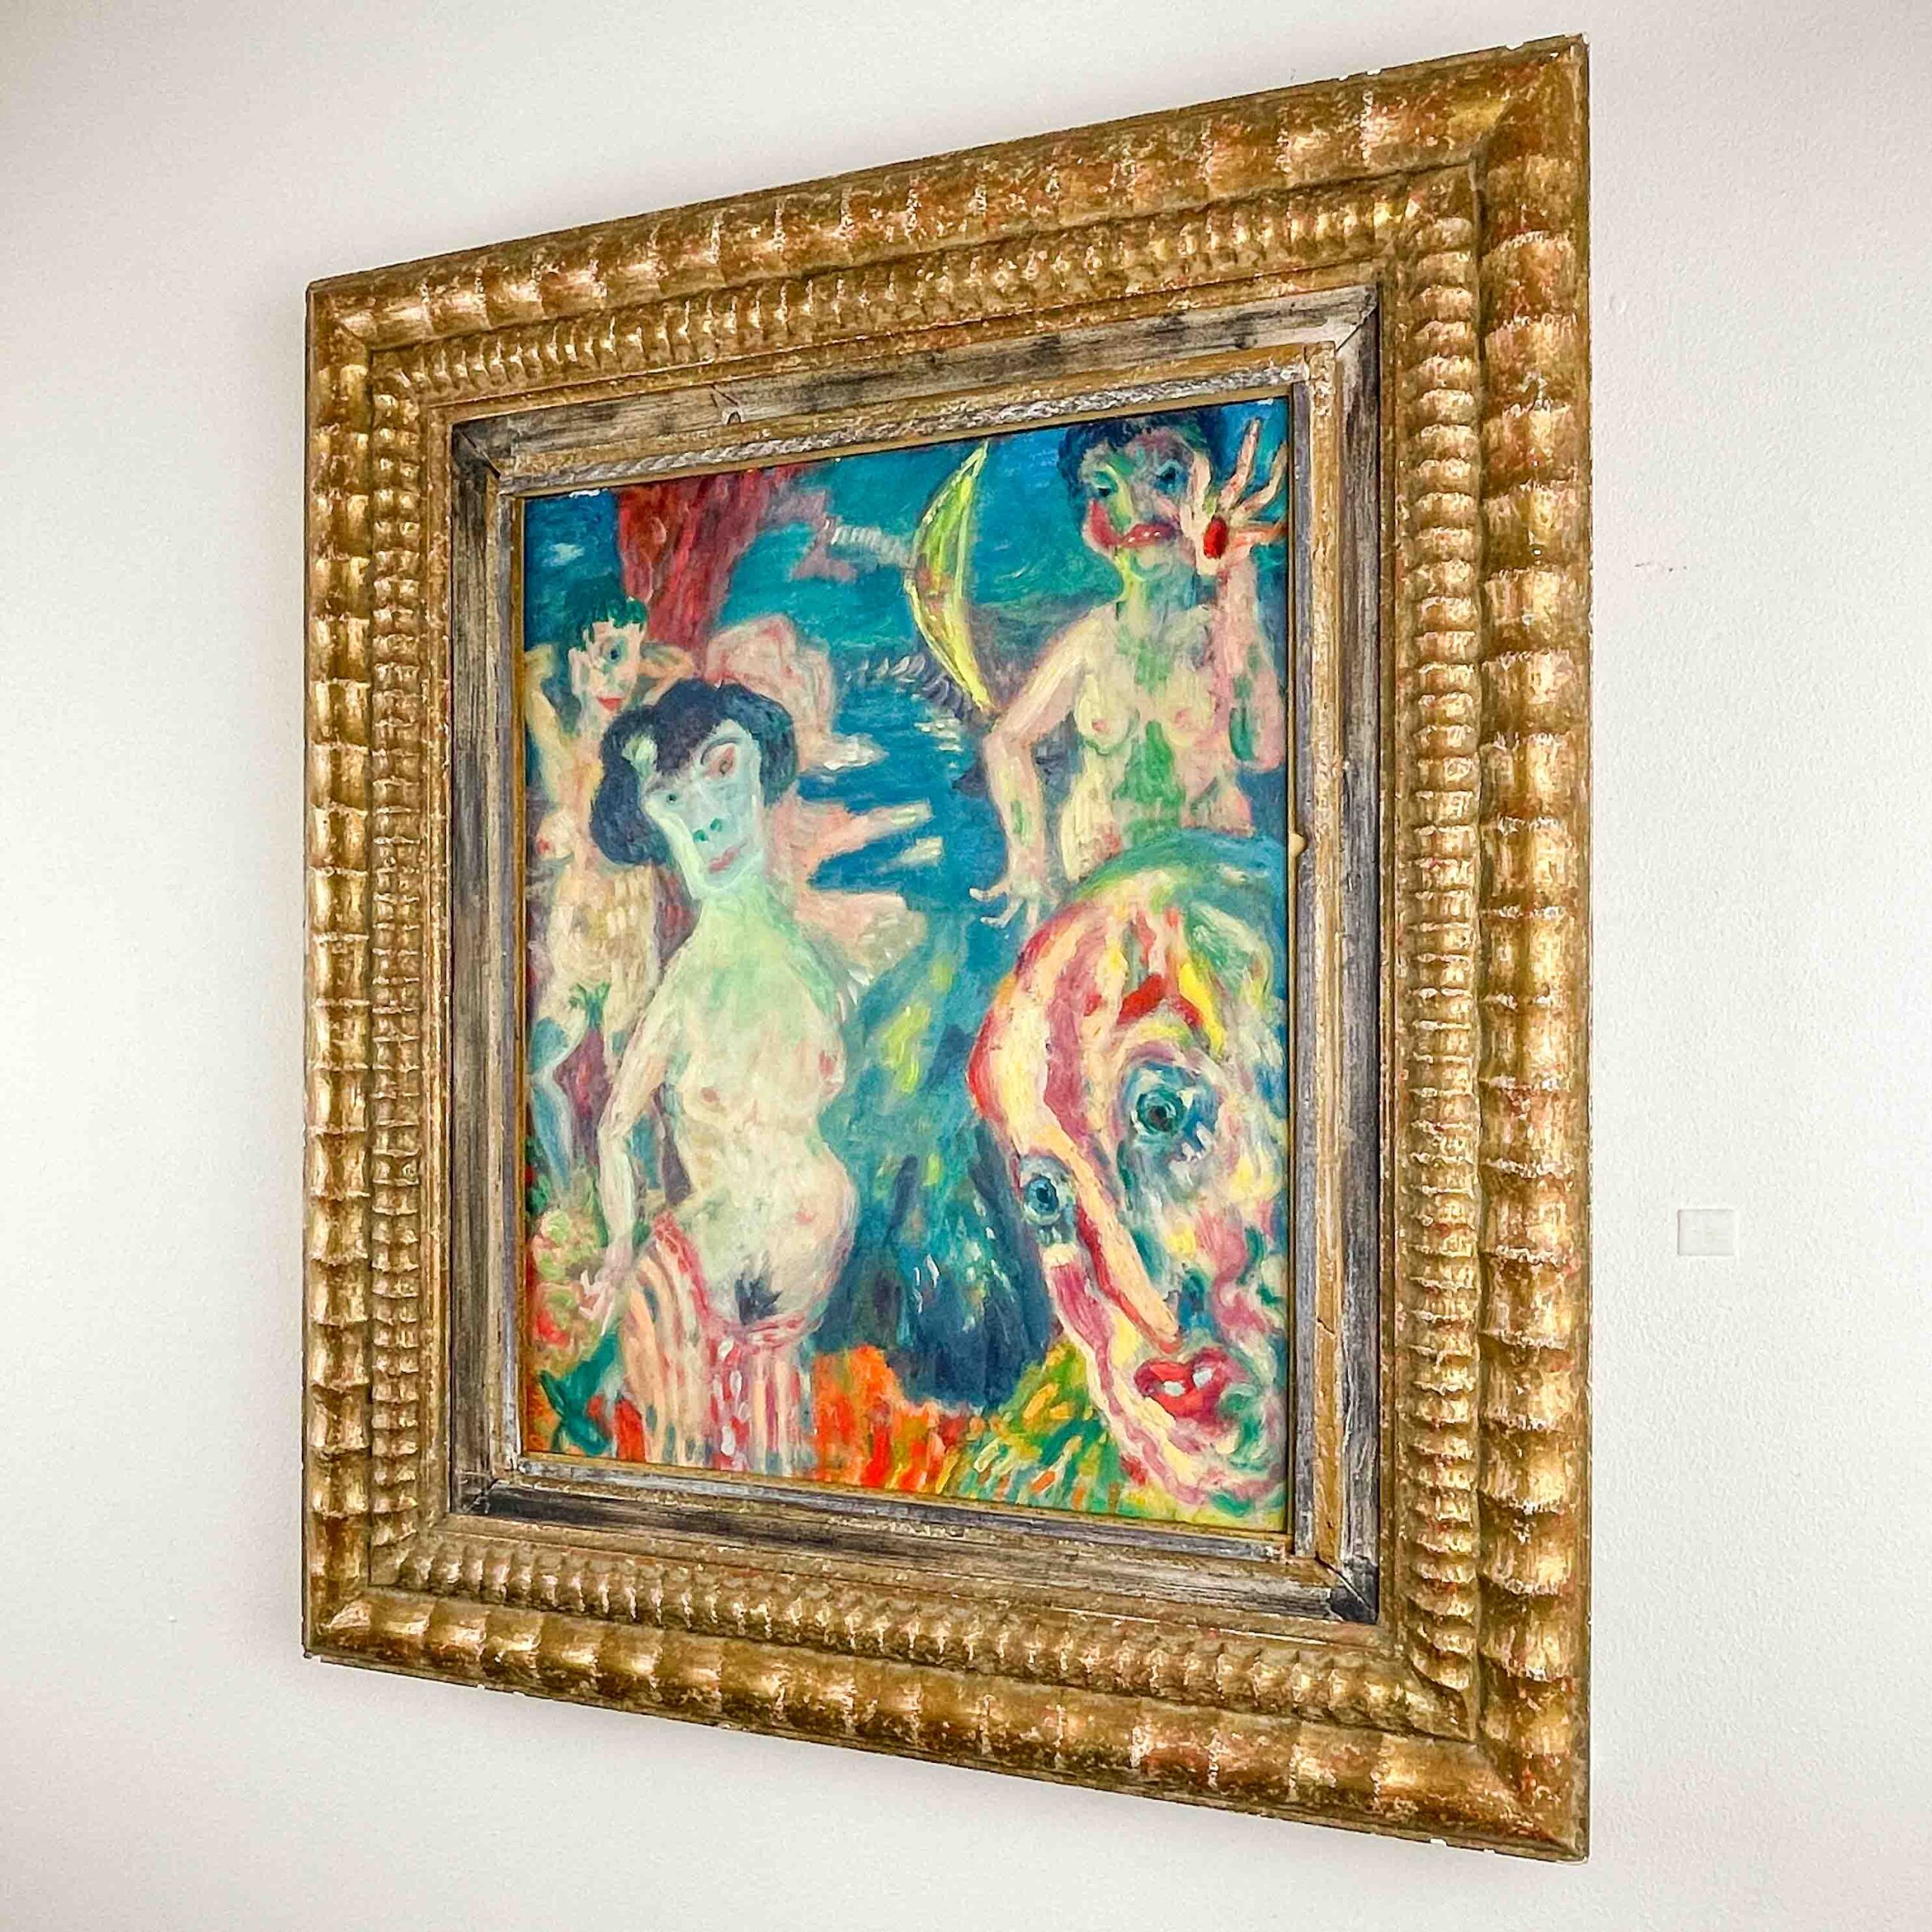 Aad de Haas- “The Temptation of St Anthony”, 1959 – oil on board, professionally framed